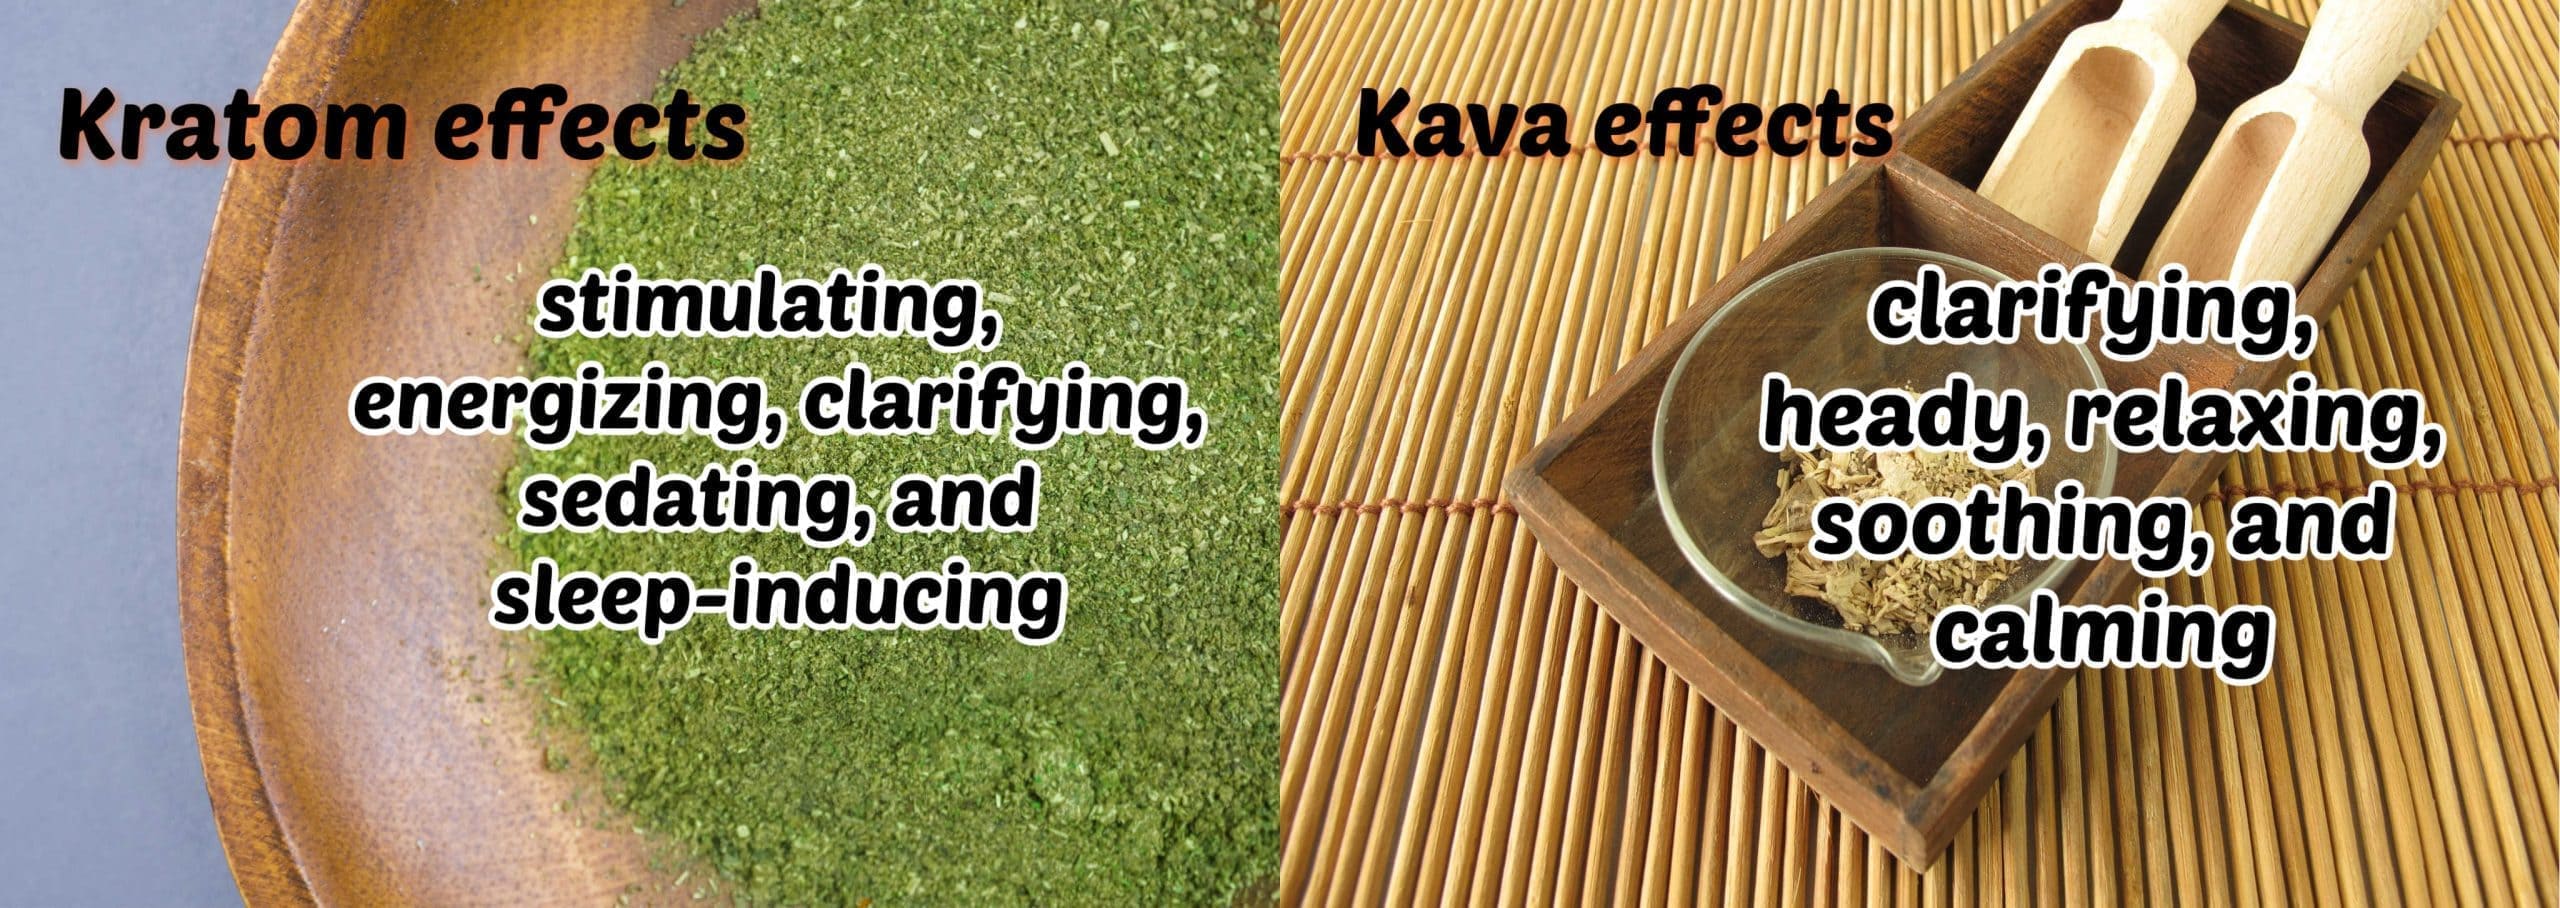 image of effects of kratom and kava